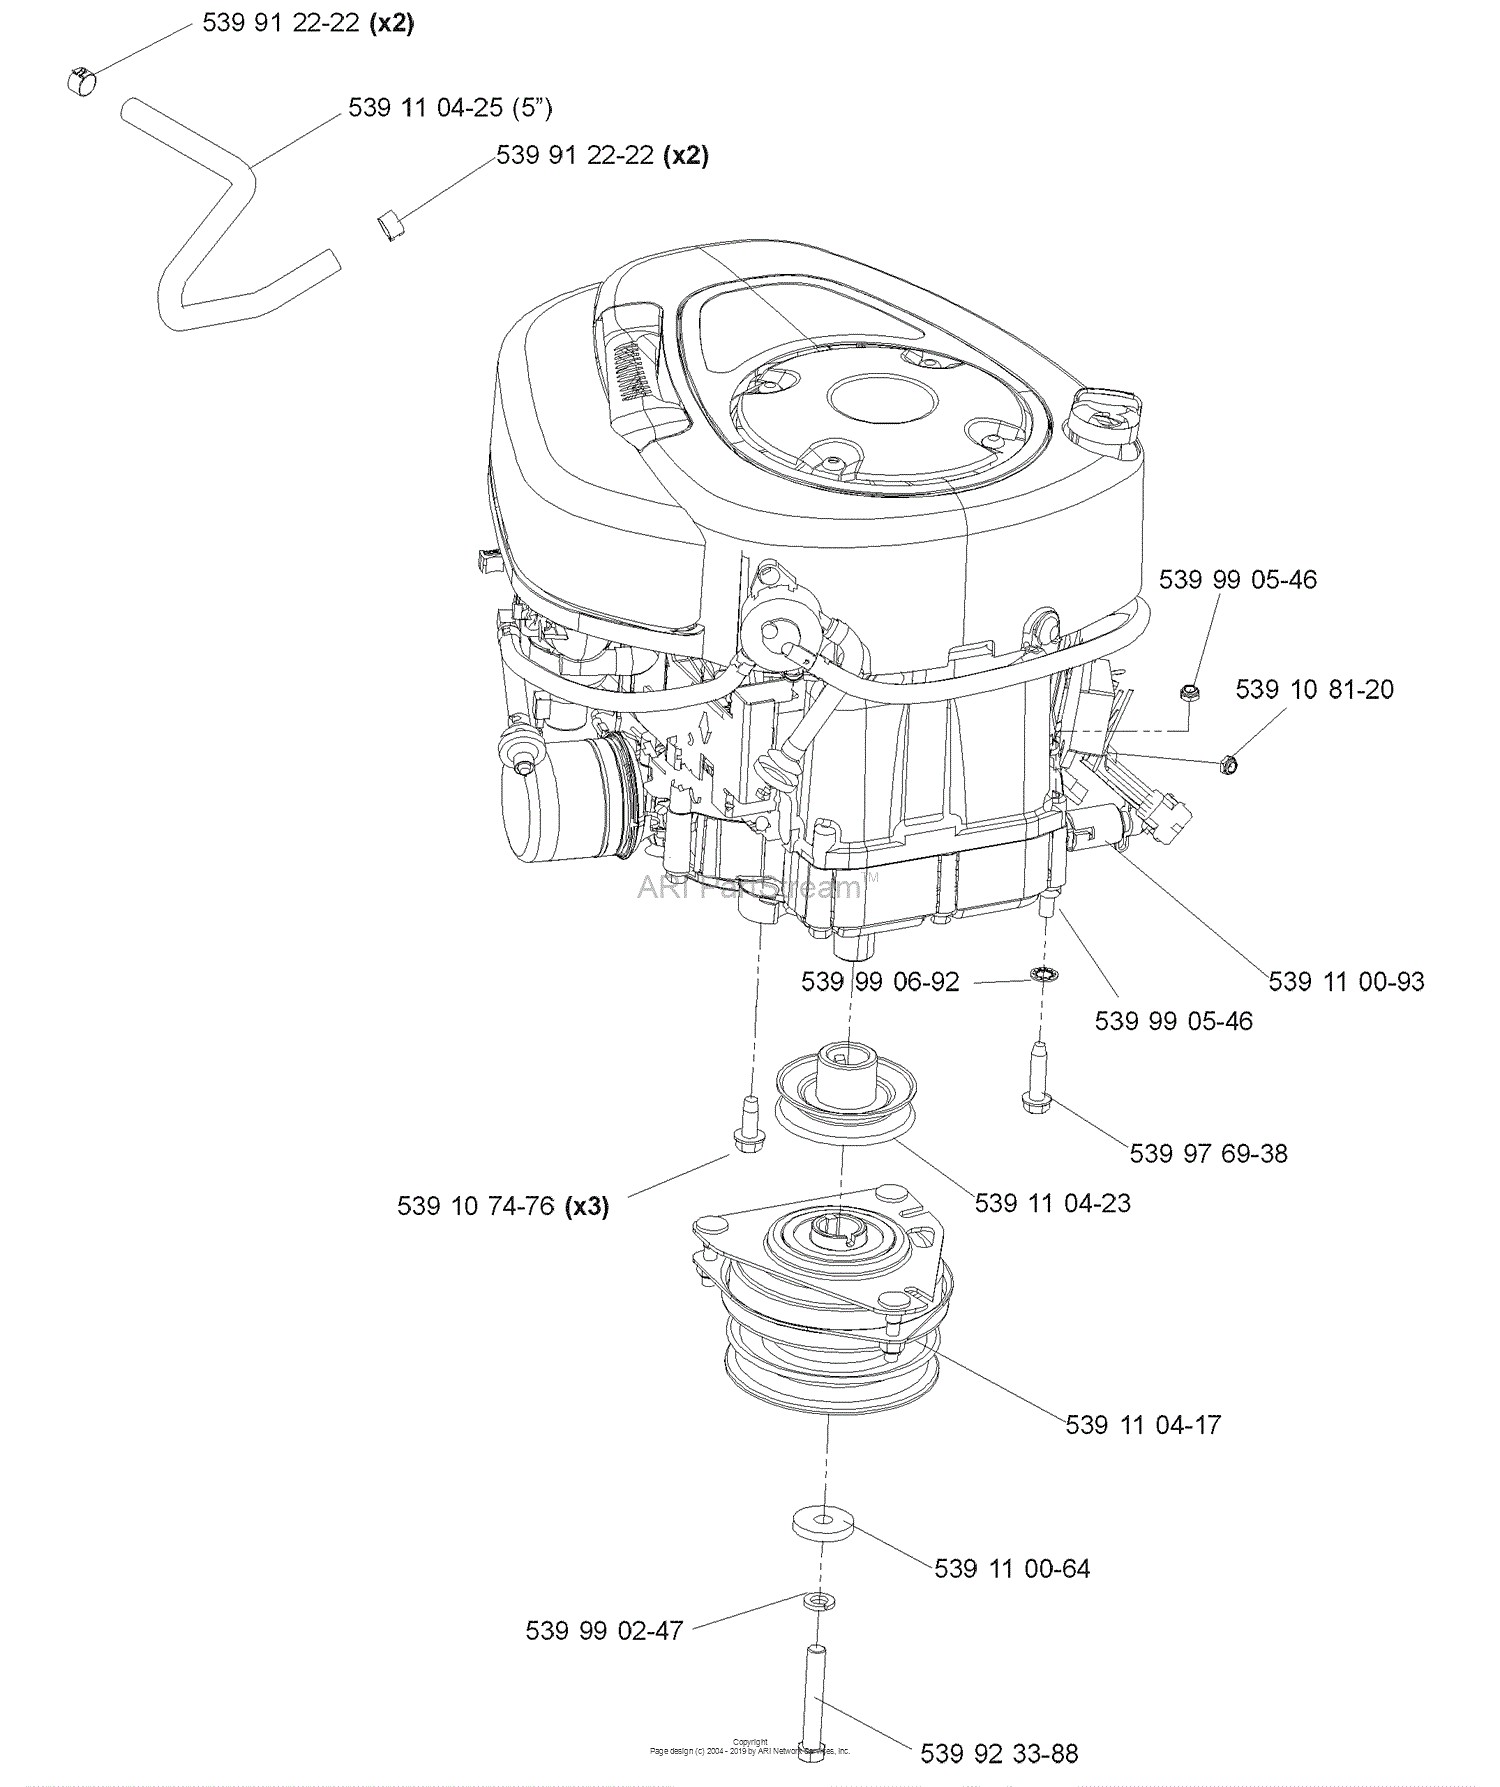 Parts for 17.5 Briggs Stratton Engine Husqvarna Z 3815 Bia 2006 04 Parts Diagram for Engine assembly 15 & 17 5 Hp Of Parts for 17.5 Briggs Stratton Engine